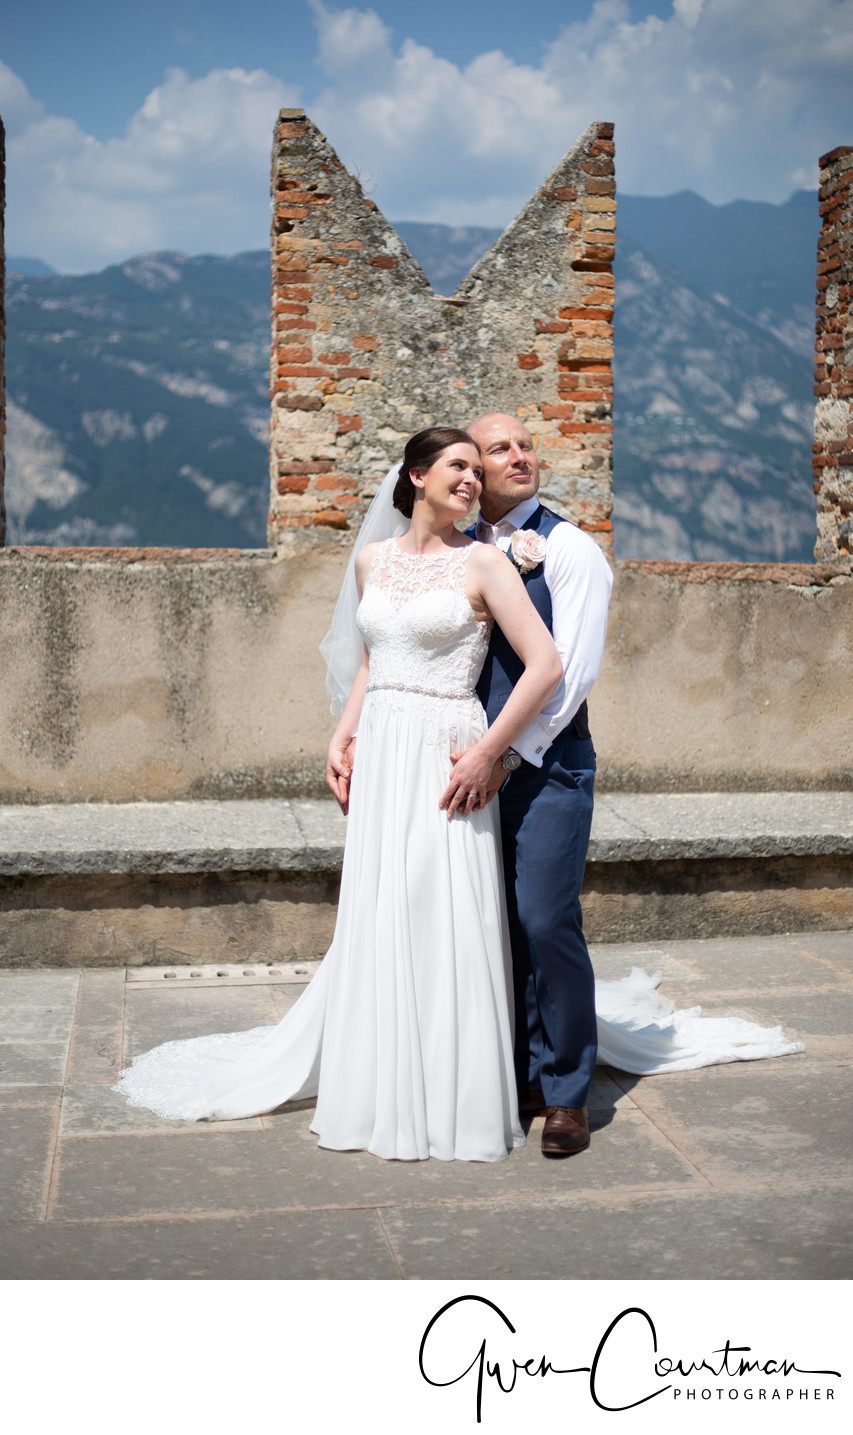 Penny and James on Malcesine Castle Dancing terrace